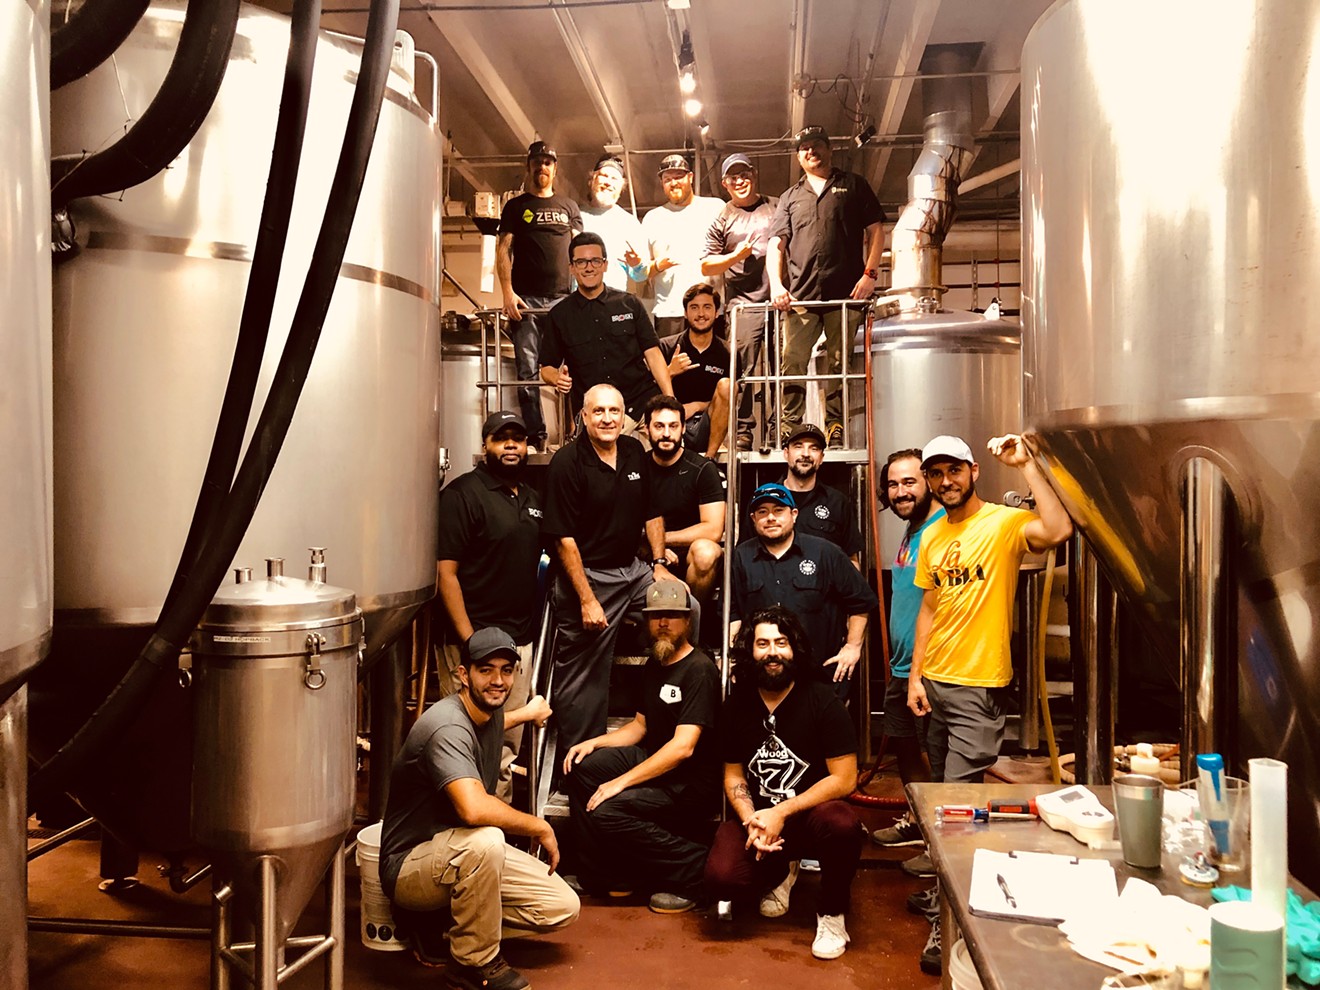 The Onward Together brew crew.